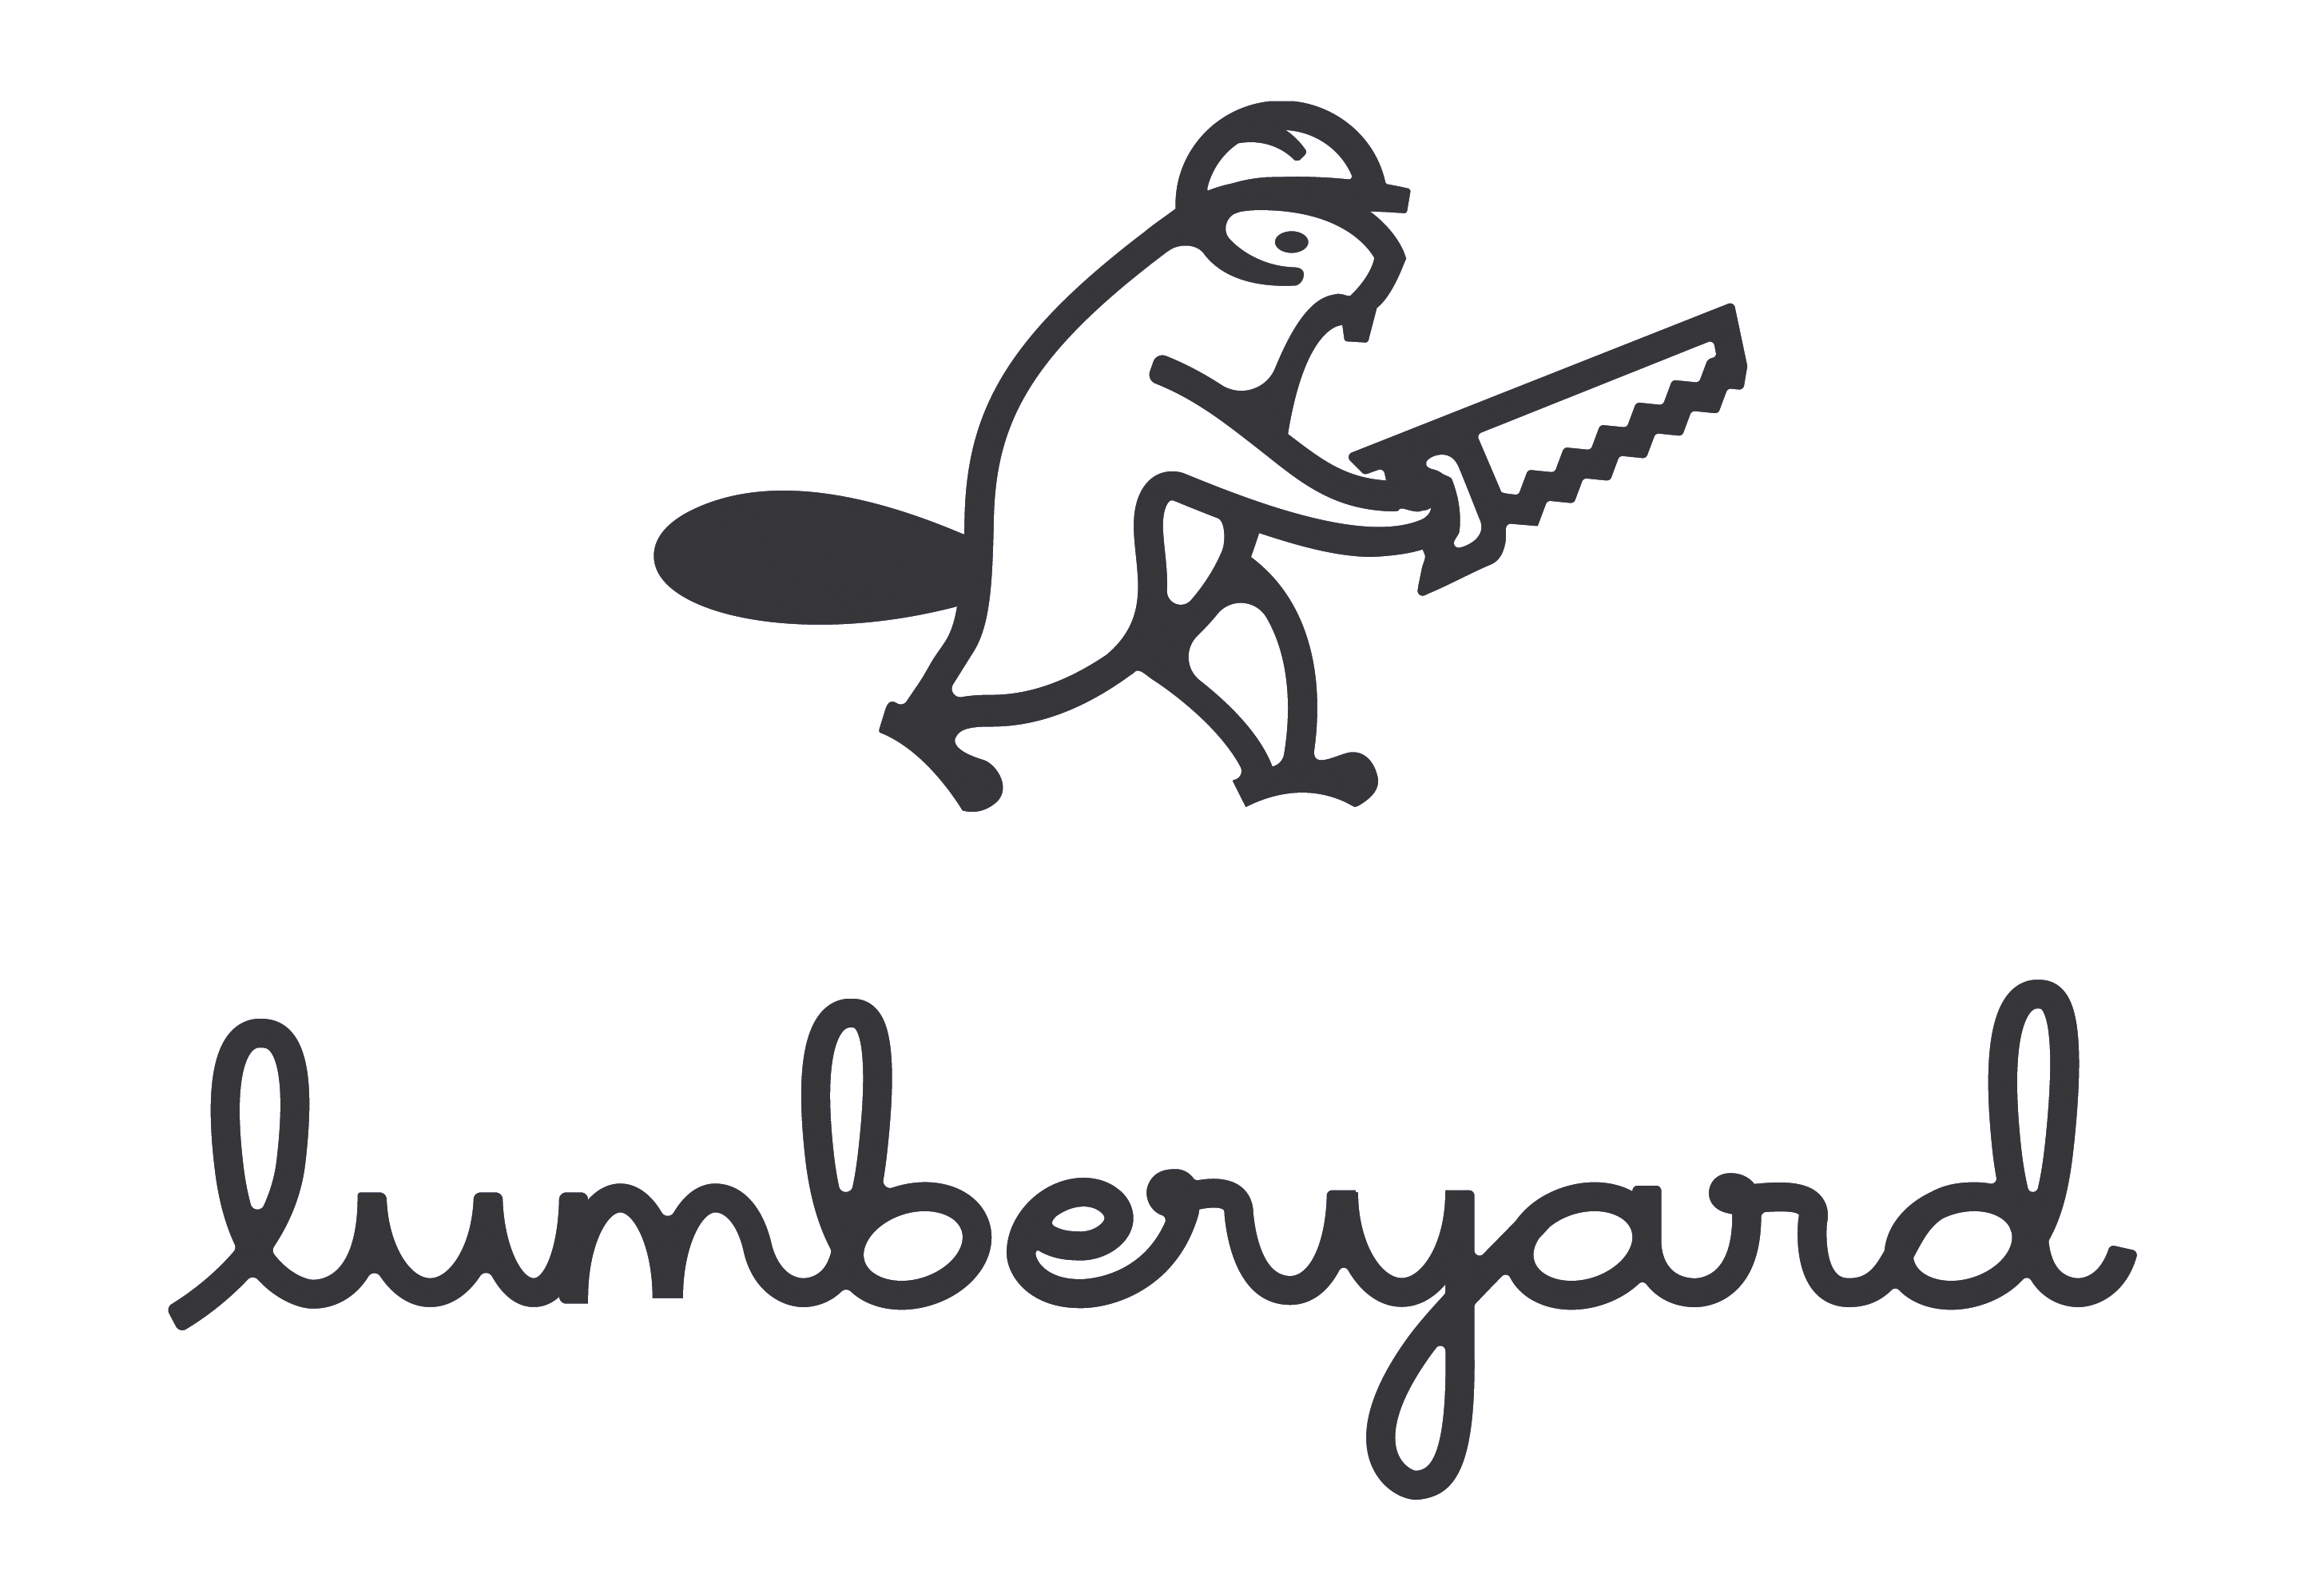 After the release of Lumberya